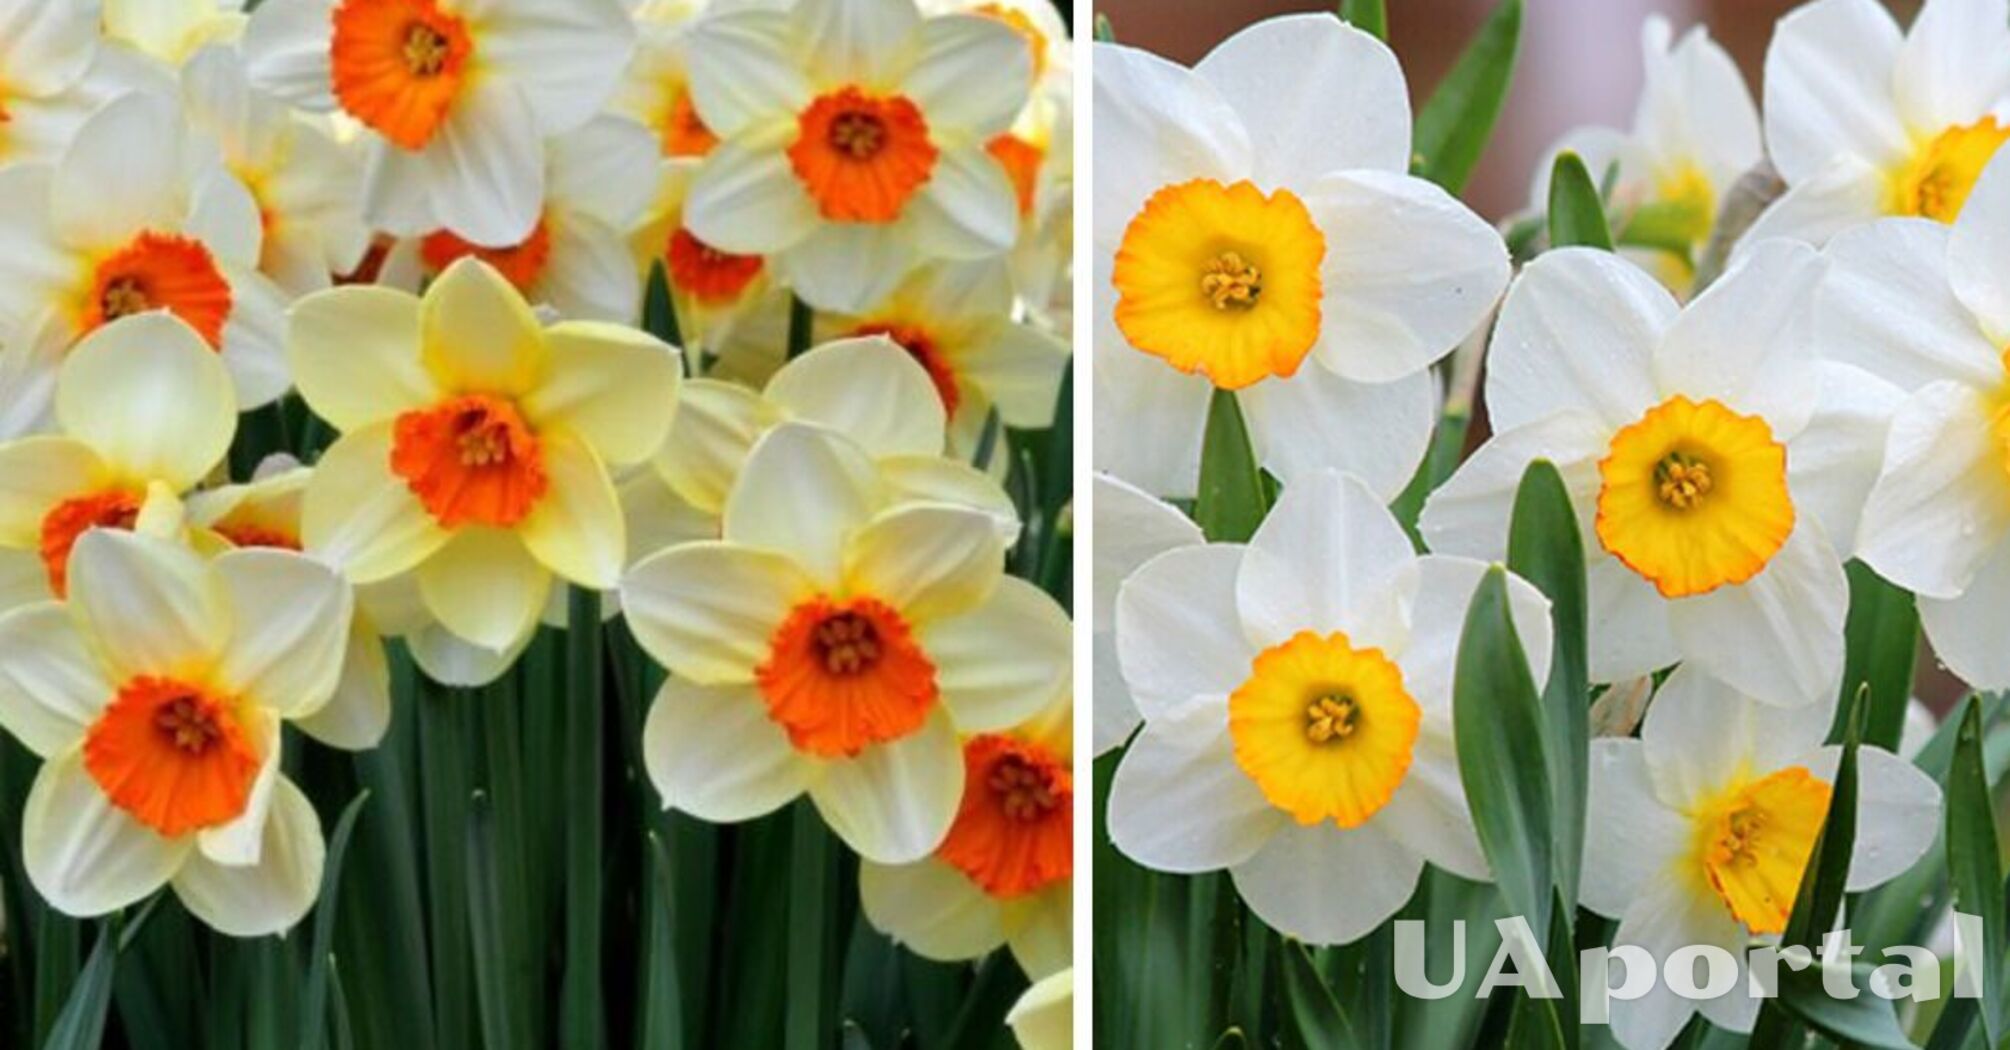 Accelerate growth and strengthen: how to fertilize daffodils in spring